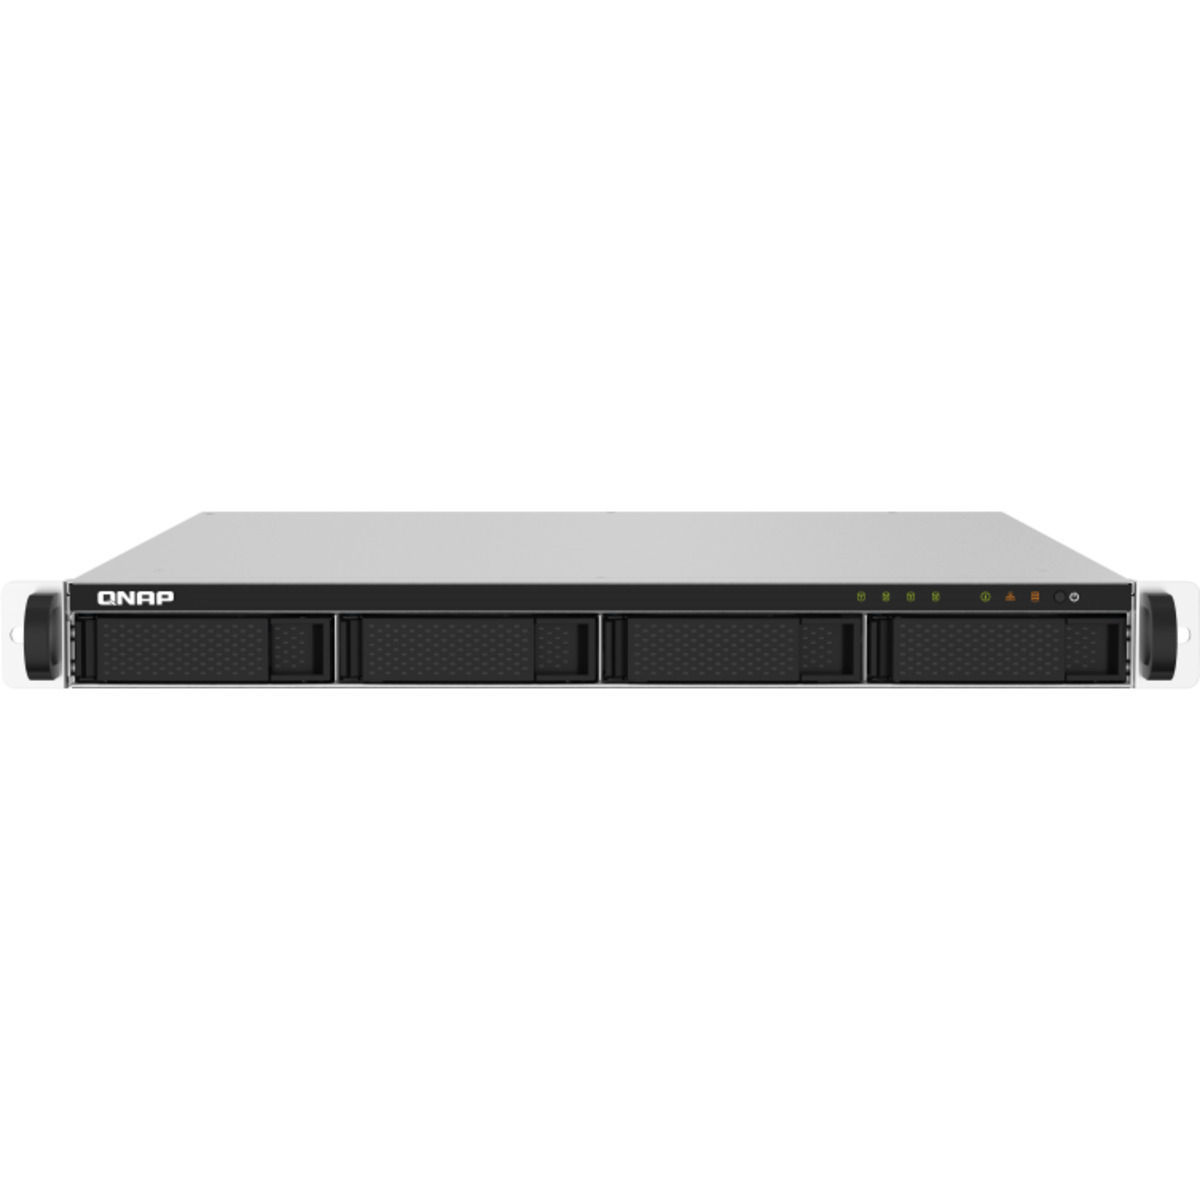 QNAP TS-432PXU-RP 80tb 4-Bay RackMount Personal / Basic Home / Small Office NAS - Network Attached Storage Device 4x20tb Toshiba Enterprise Capacity MG10ACA20TE 3.5 7200rpm SATA 6Gb/s HDD ENTERPRISE Class Drives Installed - Burn-In Tested - FREE RAM UPGRADE TS-432PXU-RP